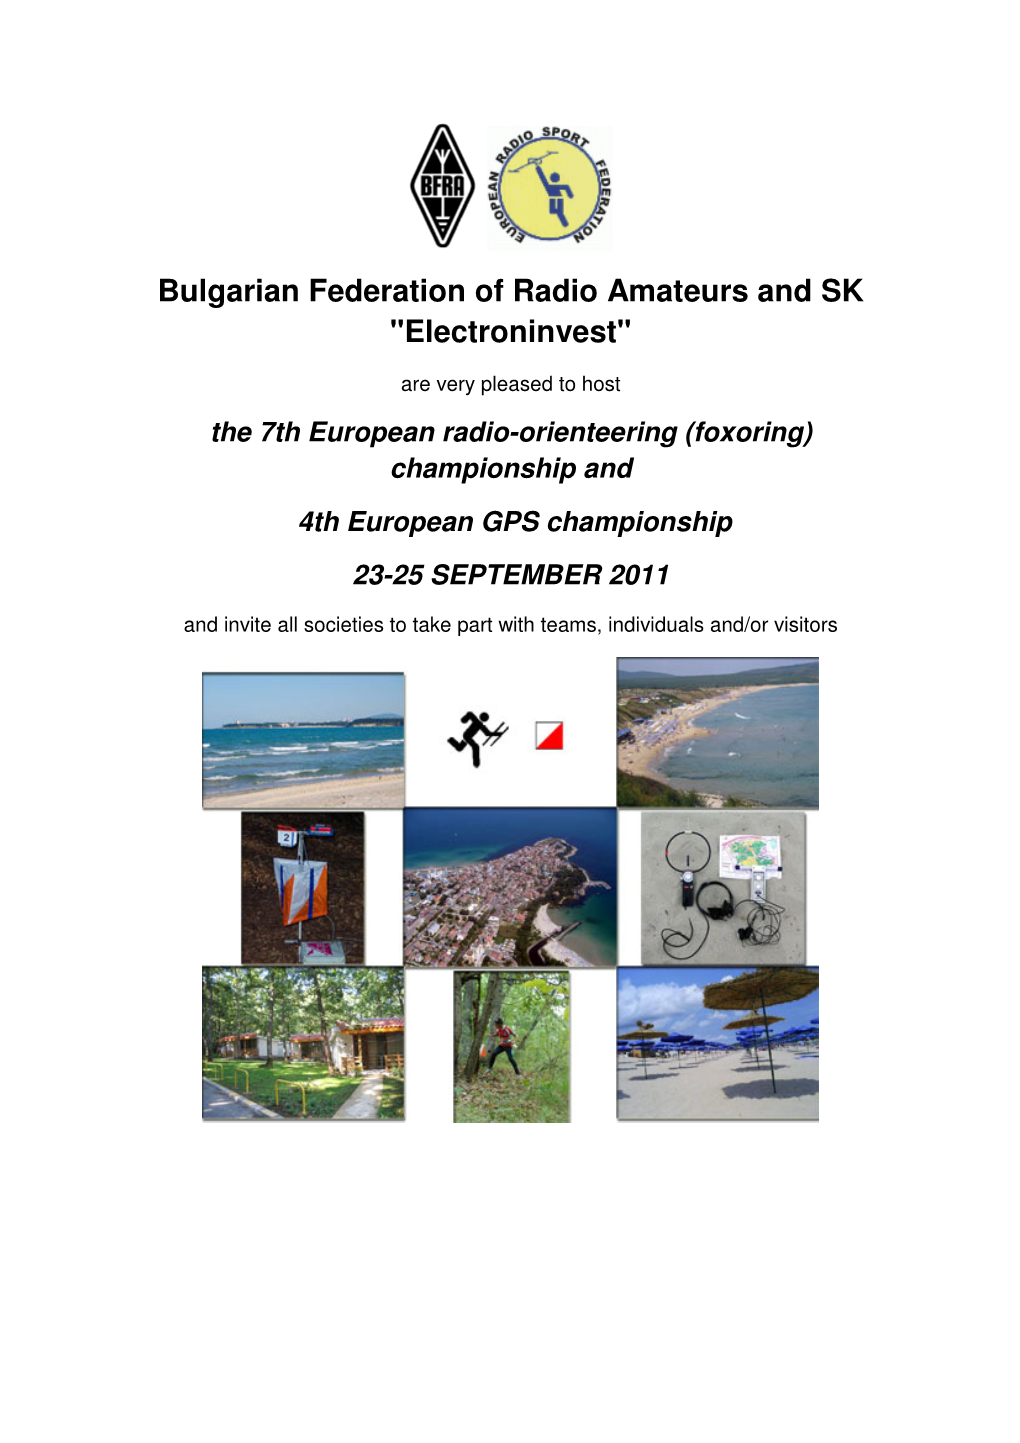 Bulgarian Federation of Radio Amateurs and SK "Electroninvest"